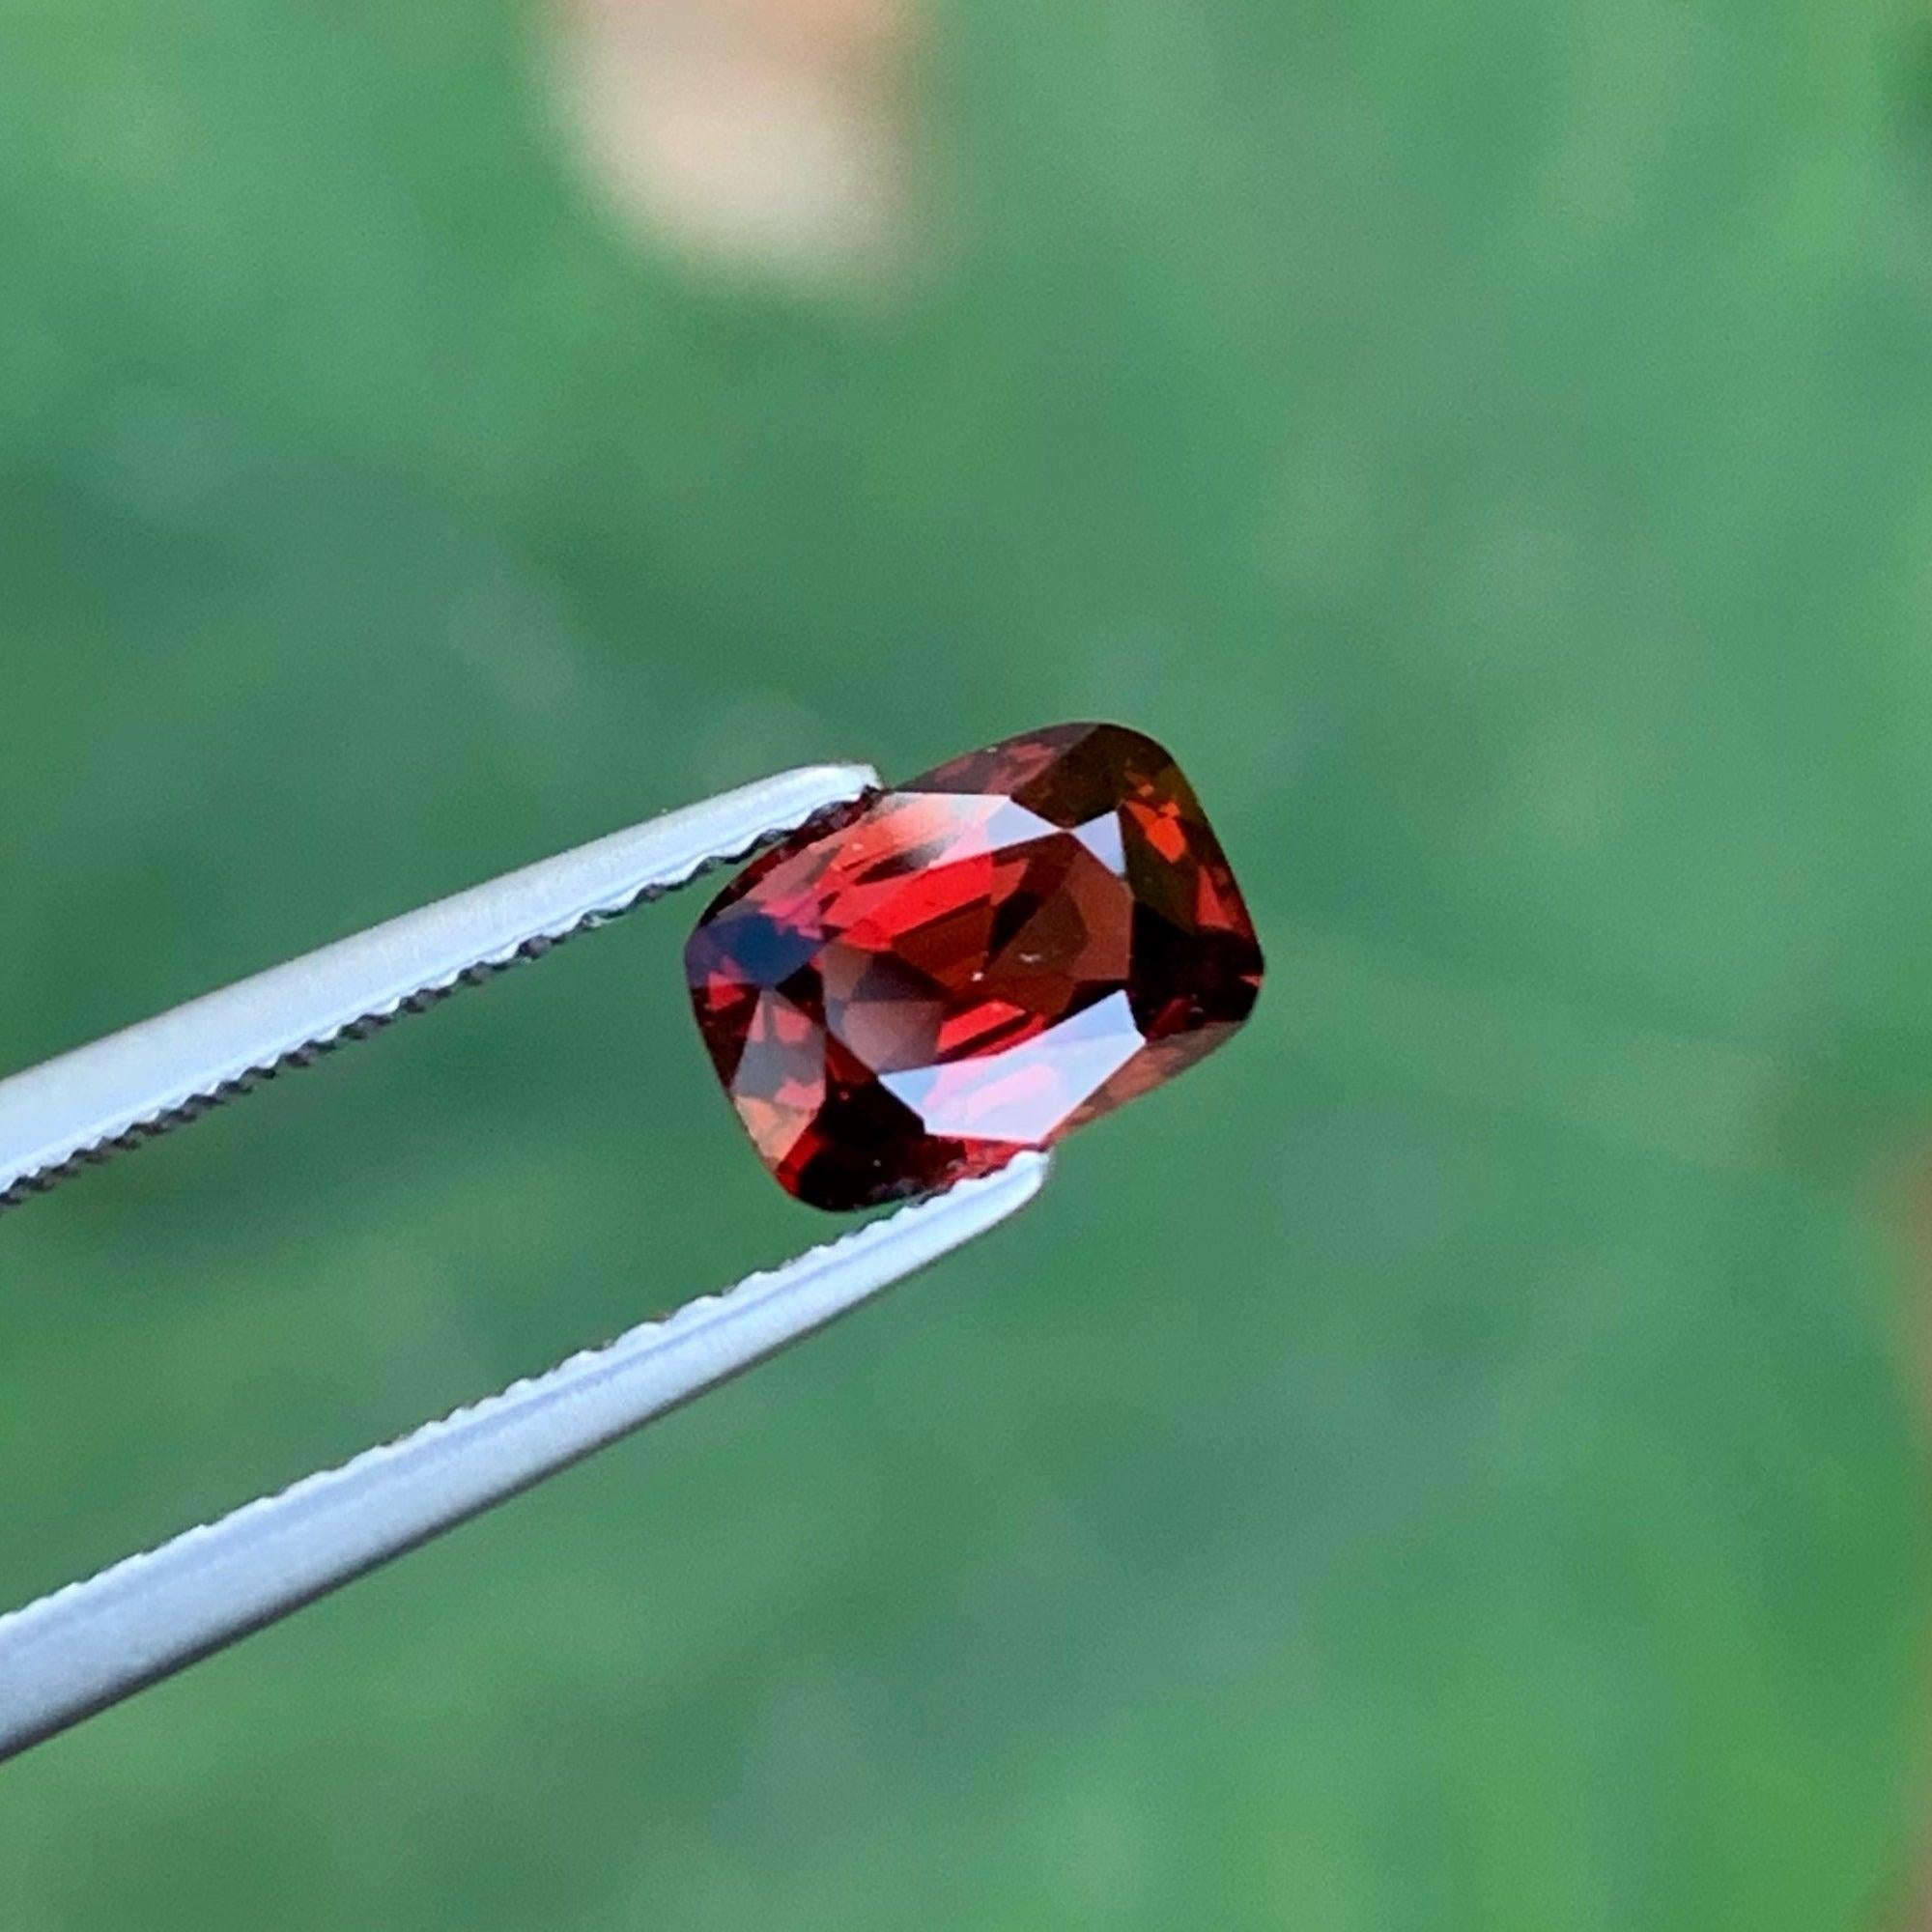 loose red spinel